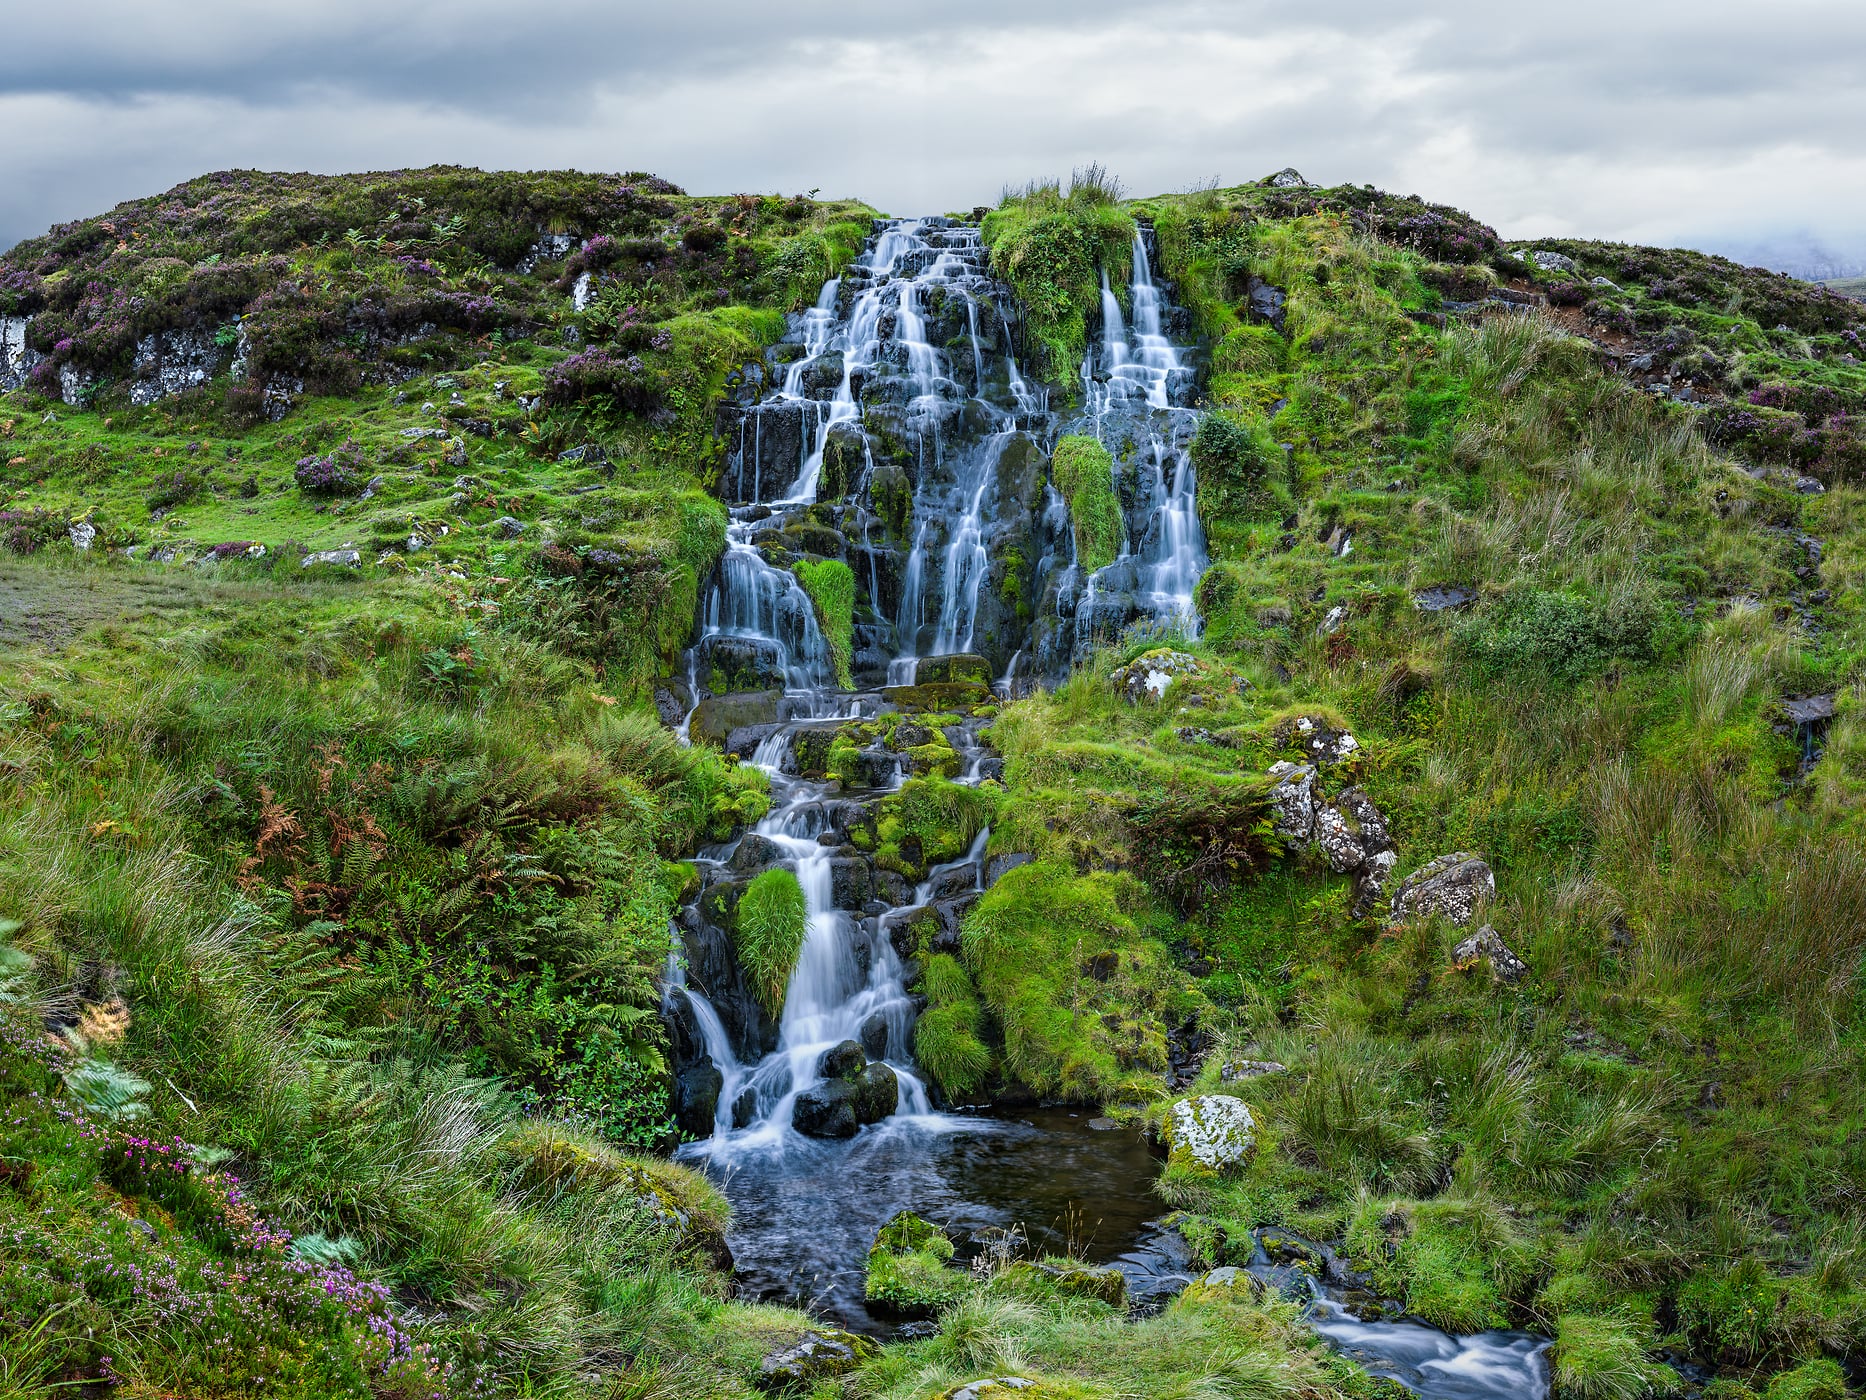 912 megapixels! A very high resolution, large-format VAST photo print of a waterfall in Scotland; nature photograph created by Scott Dimond in Isle of Skye, Scotland